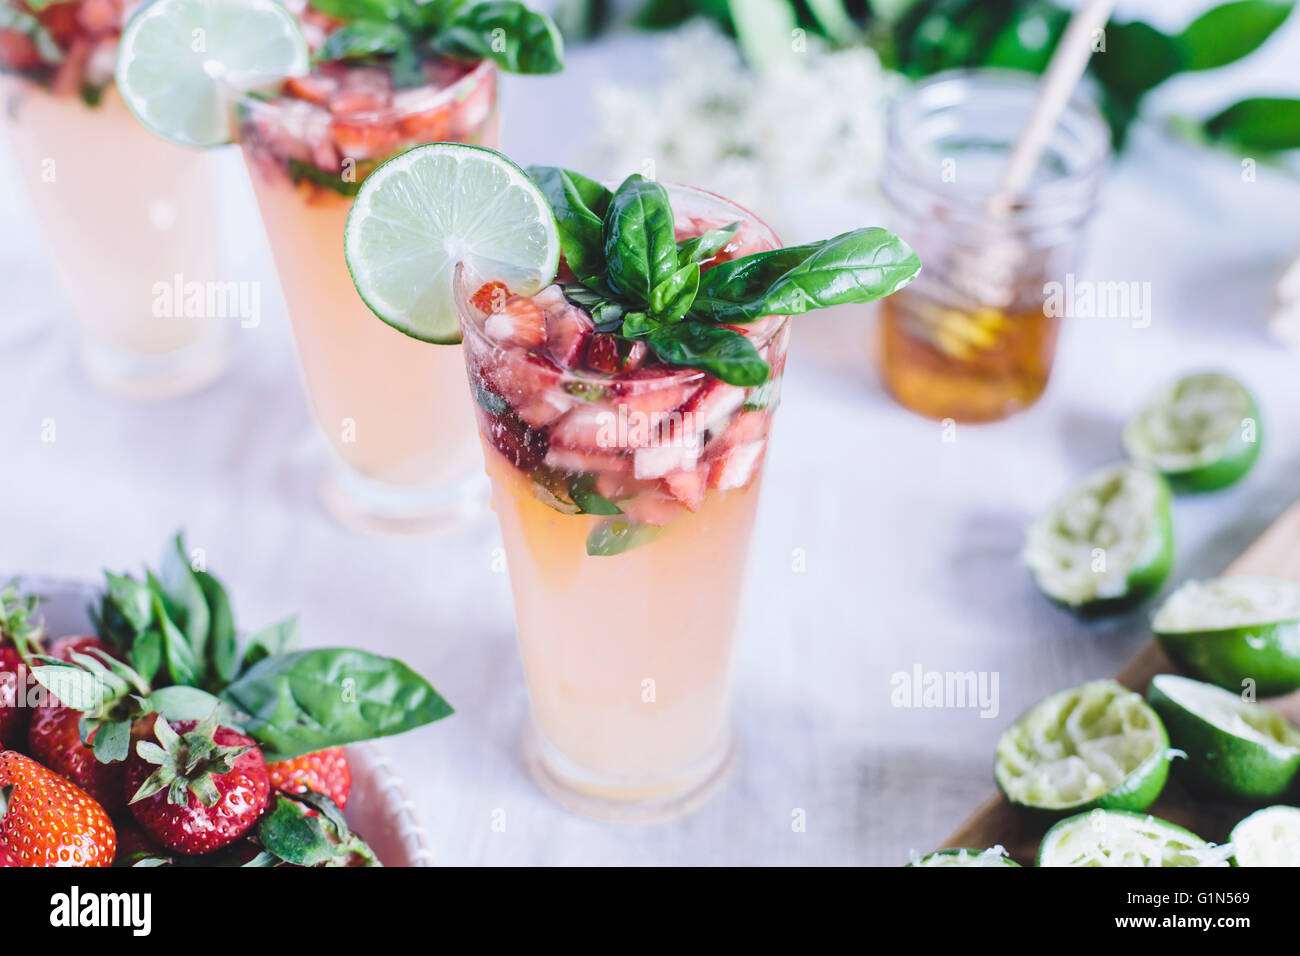 A glass of Honey Sweetened Limeade with Strawberries and Basil is photographed from the front view. Stock Photo